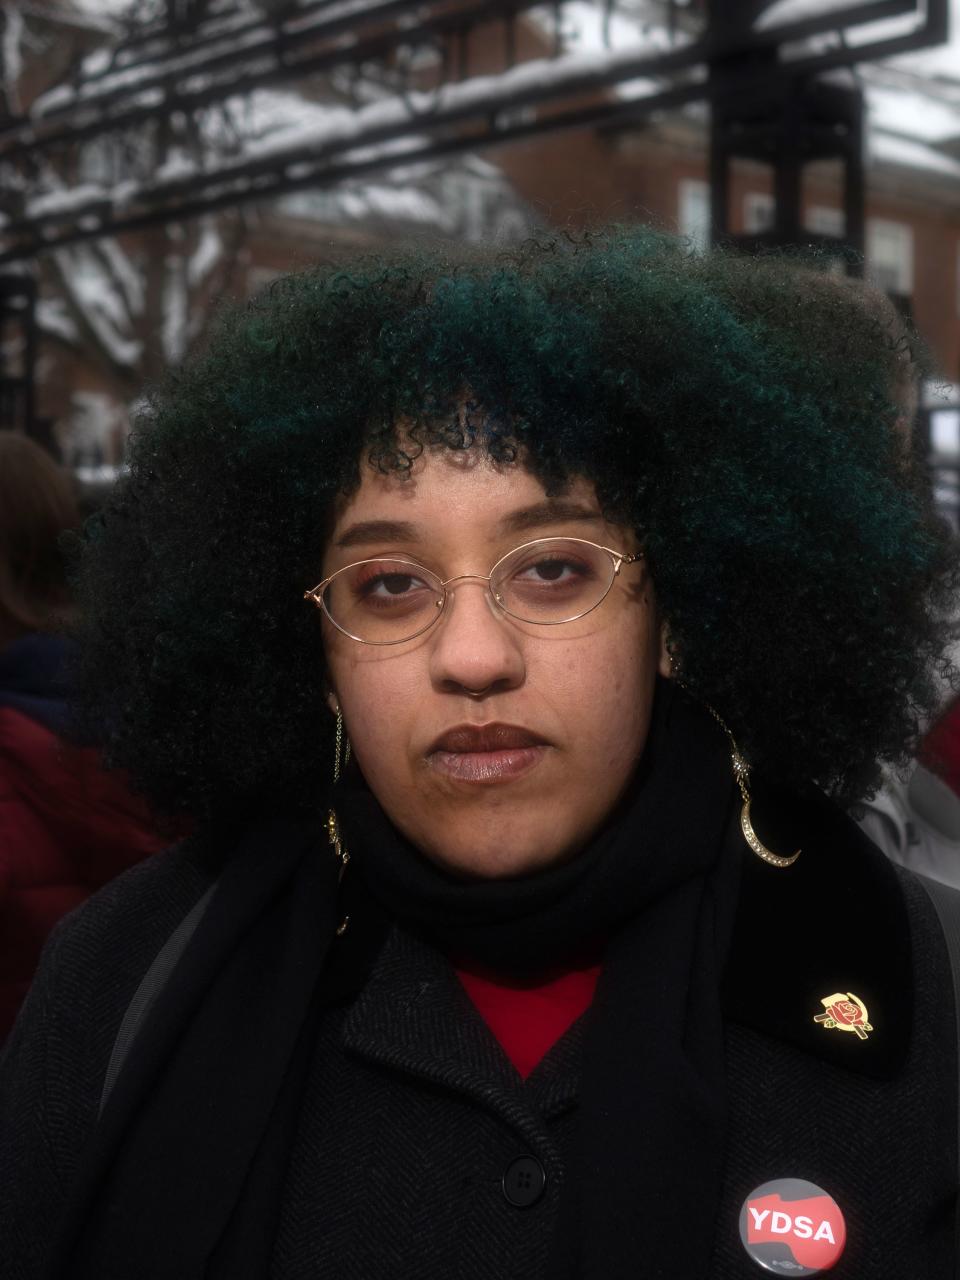 Pamela, 22, student at Cooper Union:  “Things are getting more urgent.”